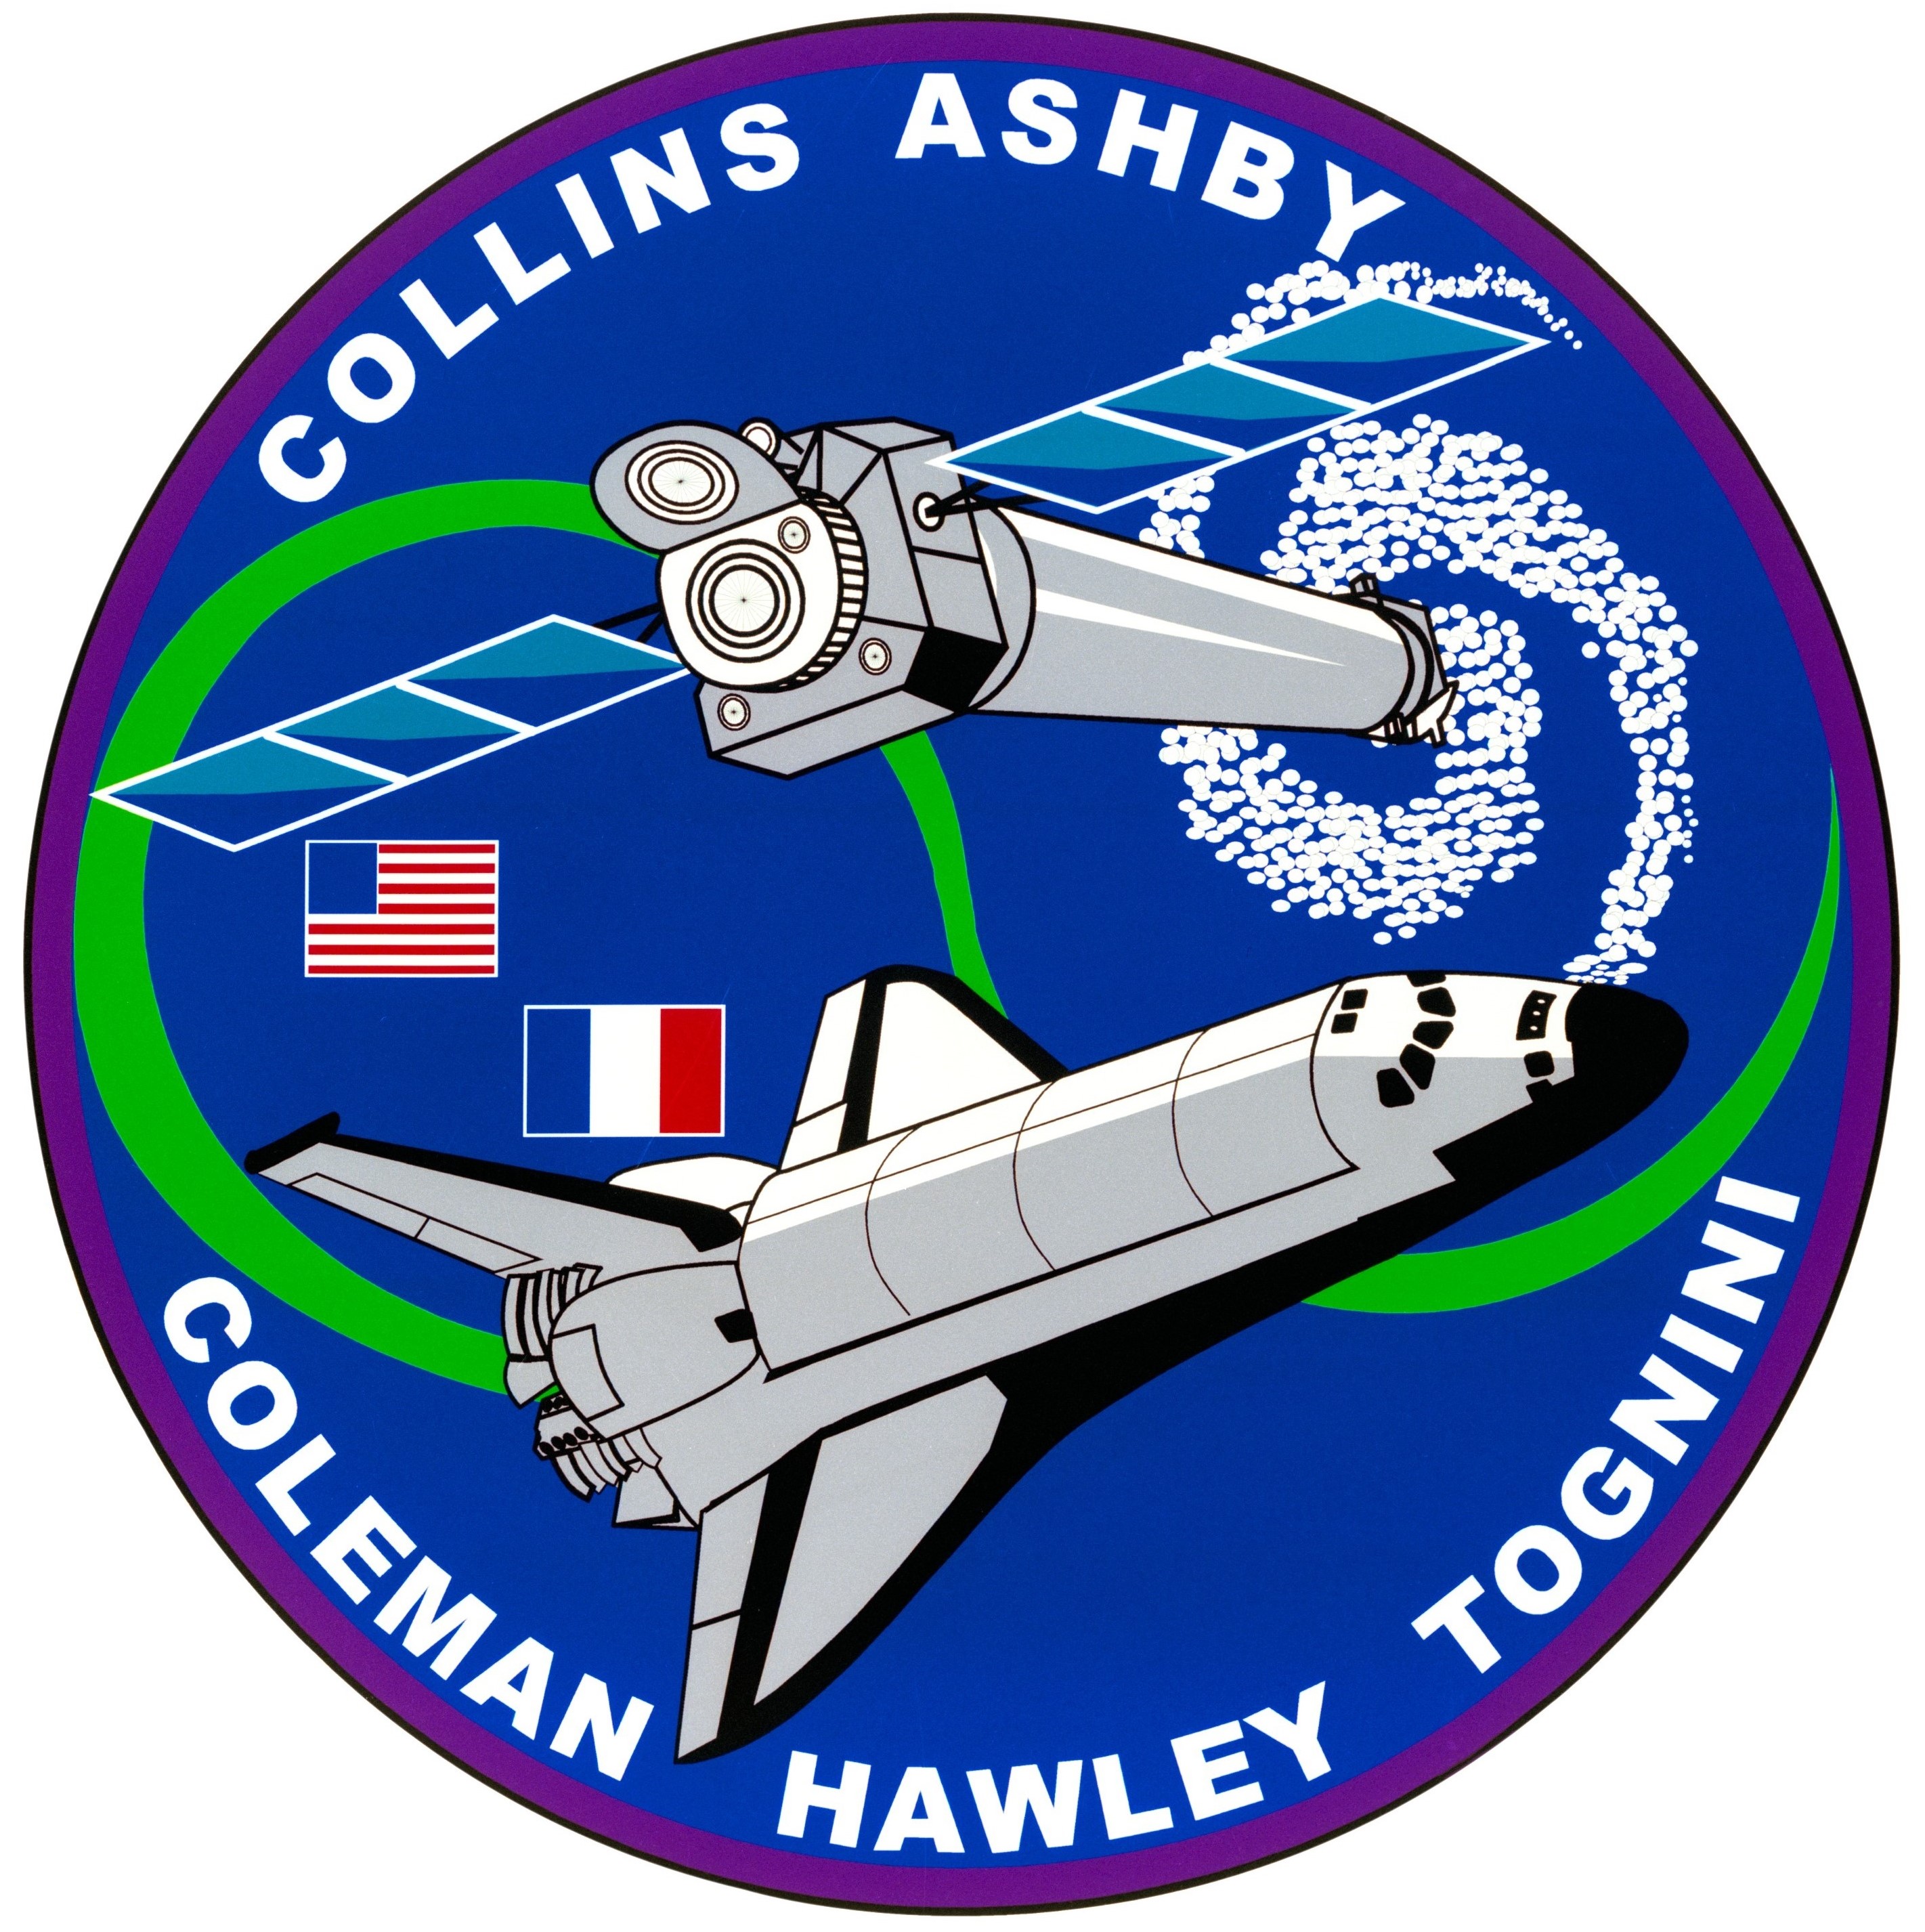 The STS-93 crew patch